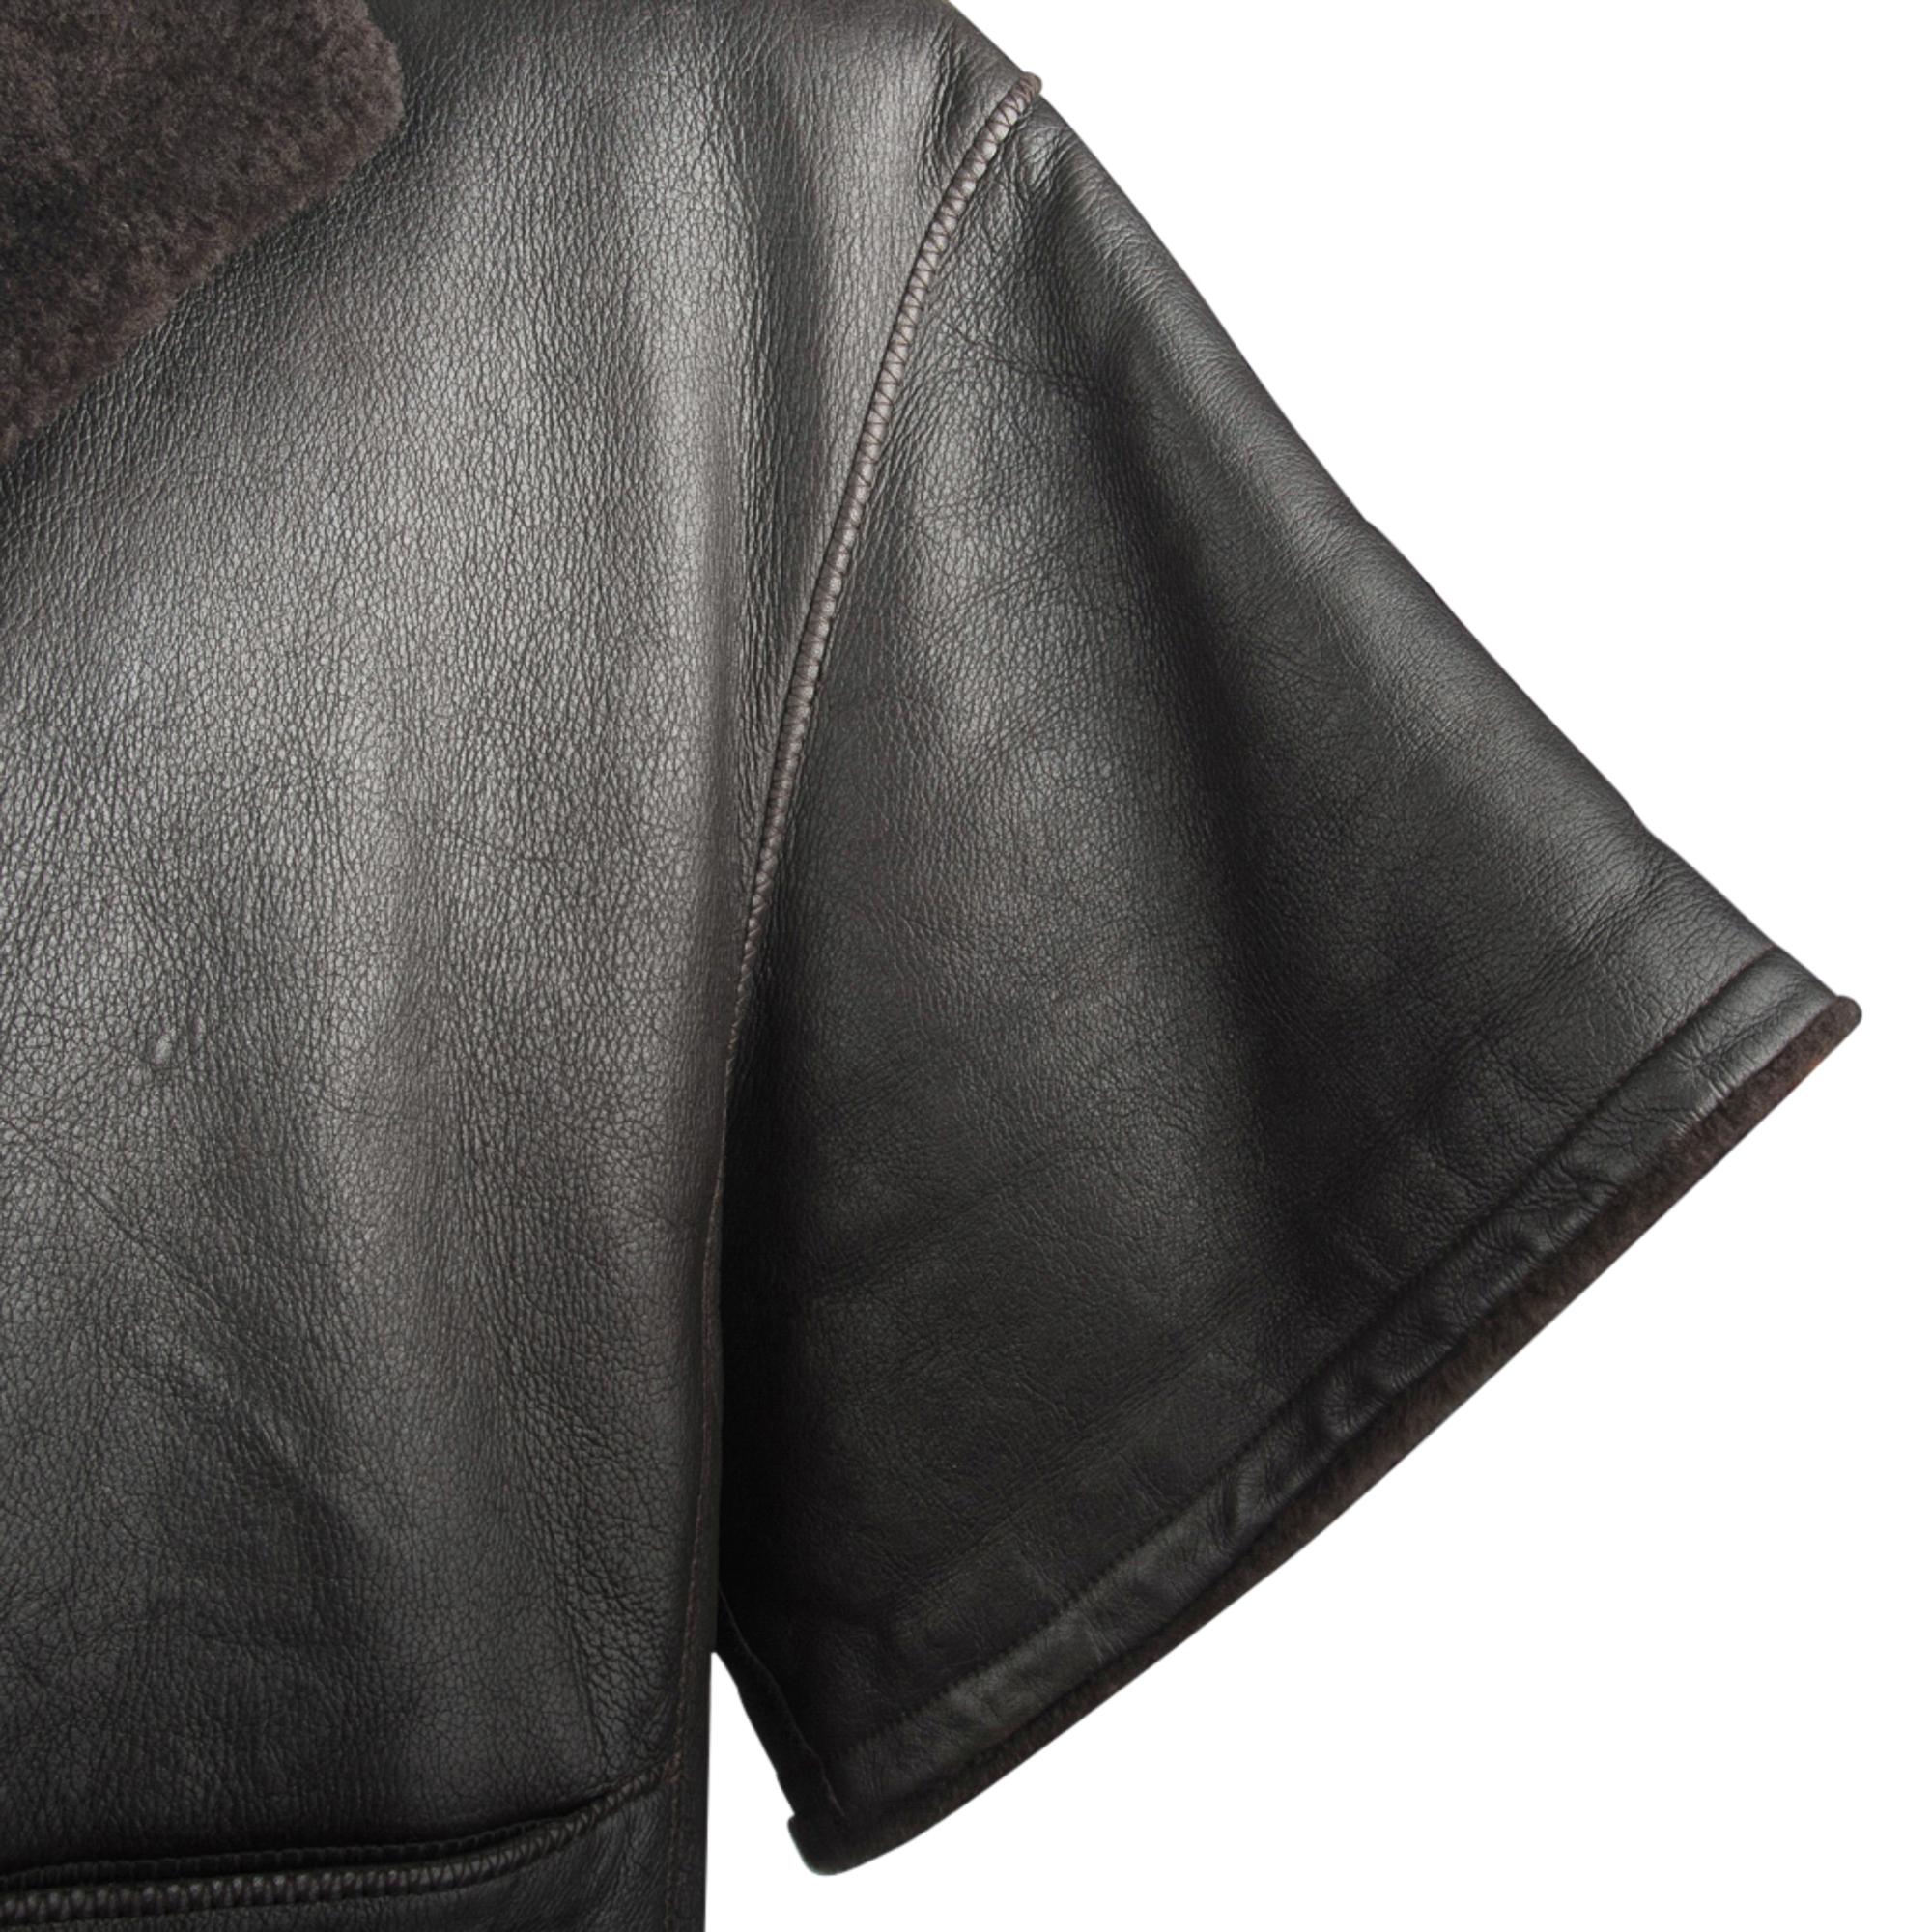 Hermes Shearling Capelet Jacket Dark Brown 3/4 Sleeve 38 / 4 to 6  Striking  In Excellent Condition For Sale In Miami, FL